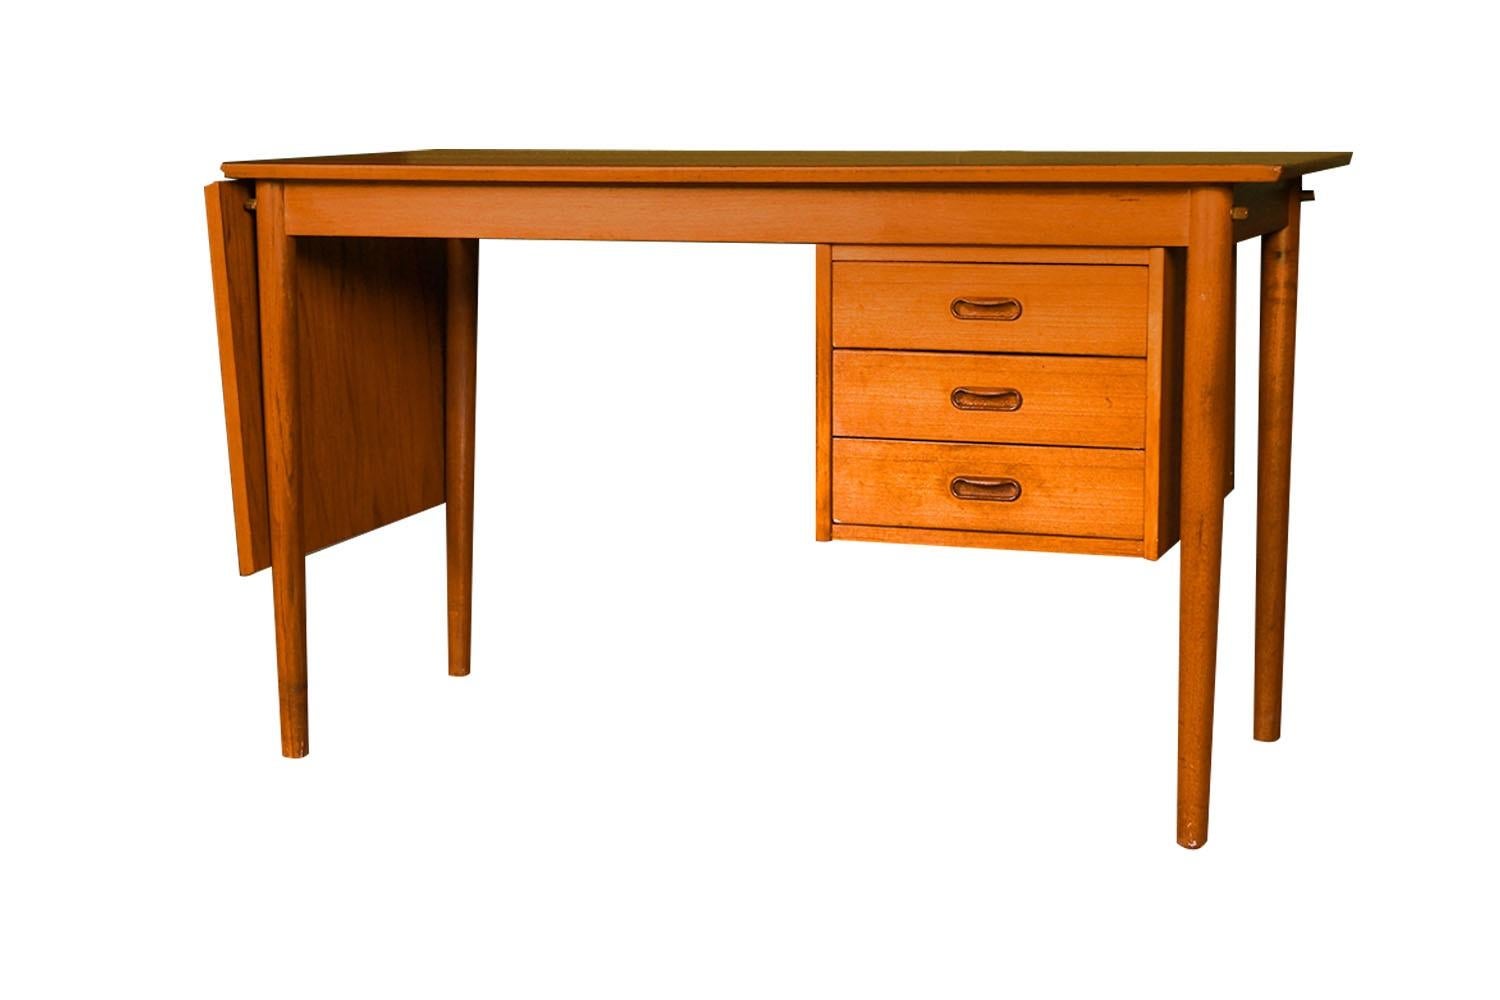 A desk with incredible form and presence. This rare most attractive original Danish Modern drop leaf desk by Arne Vodder (1926-2009) designed for Sibast Mobler in Denmark, features a drop leaf frame with floating hanging triple drawer storage